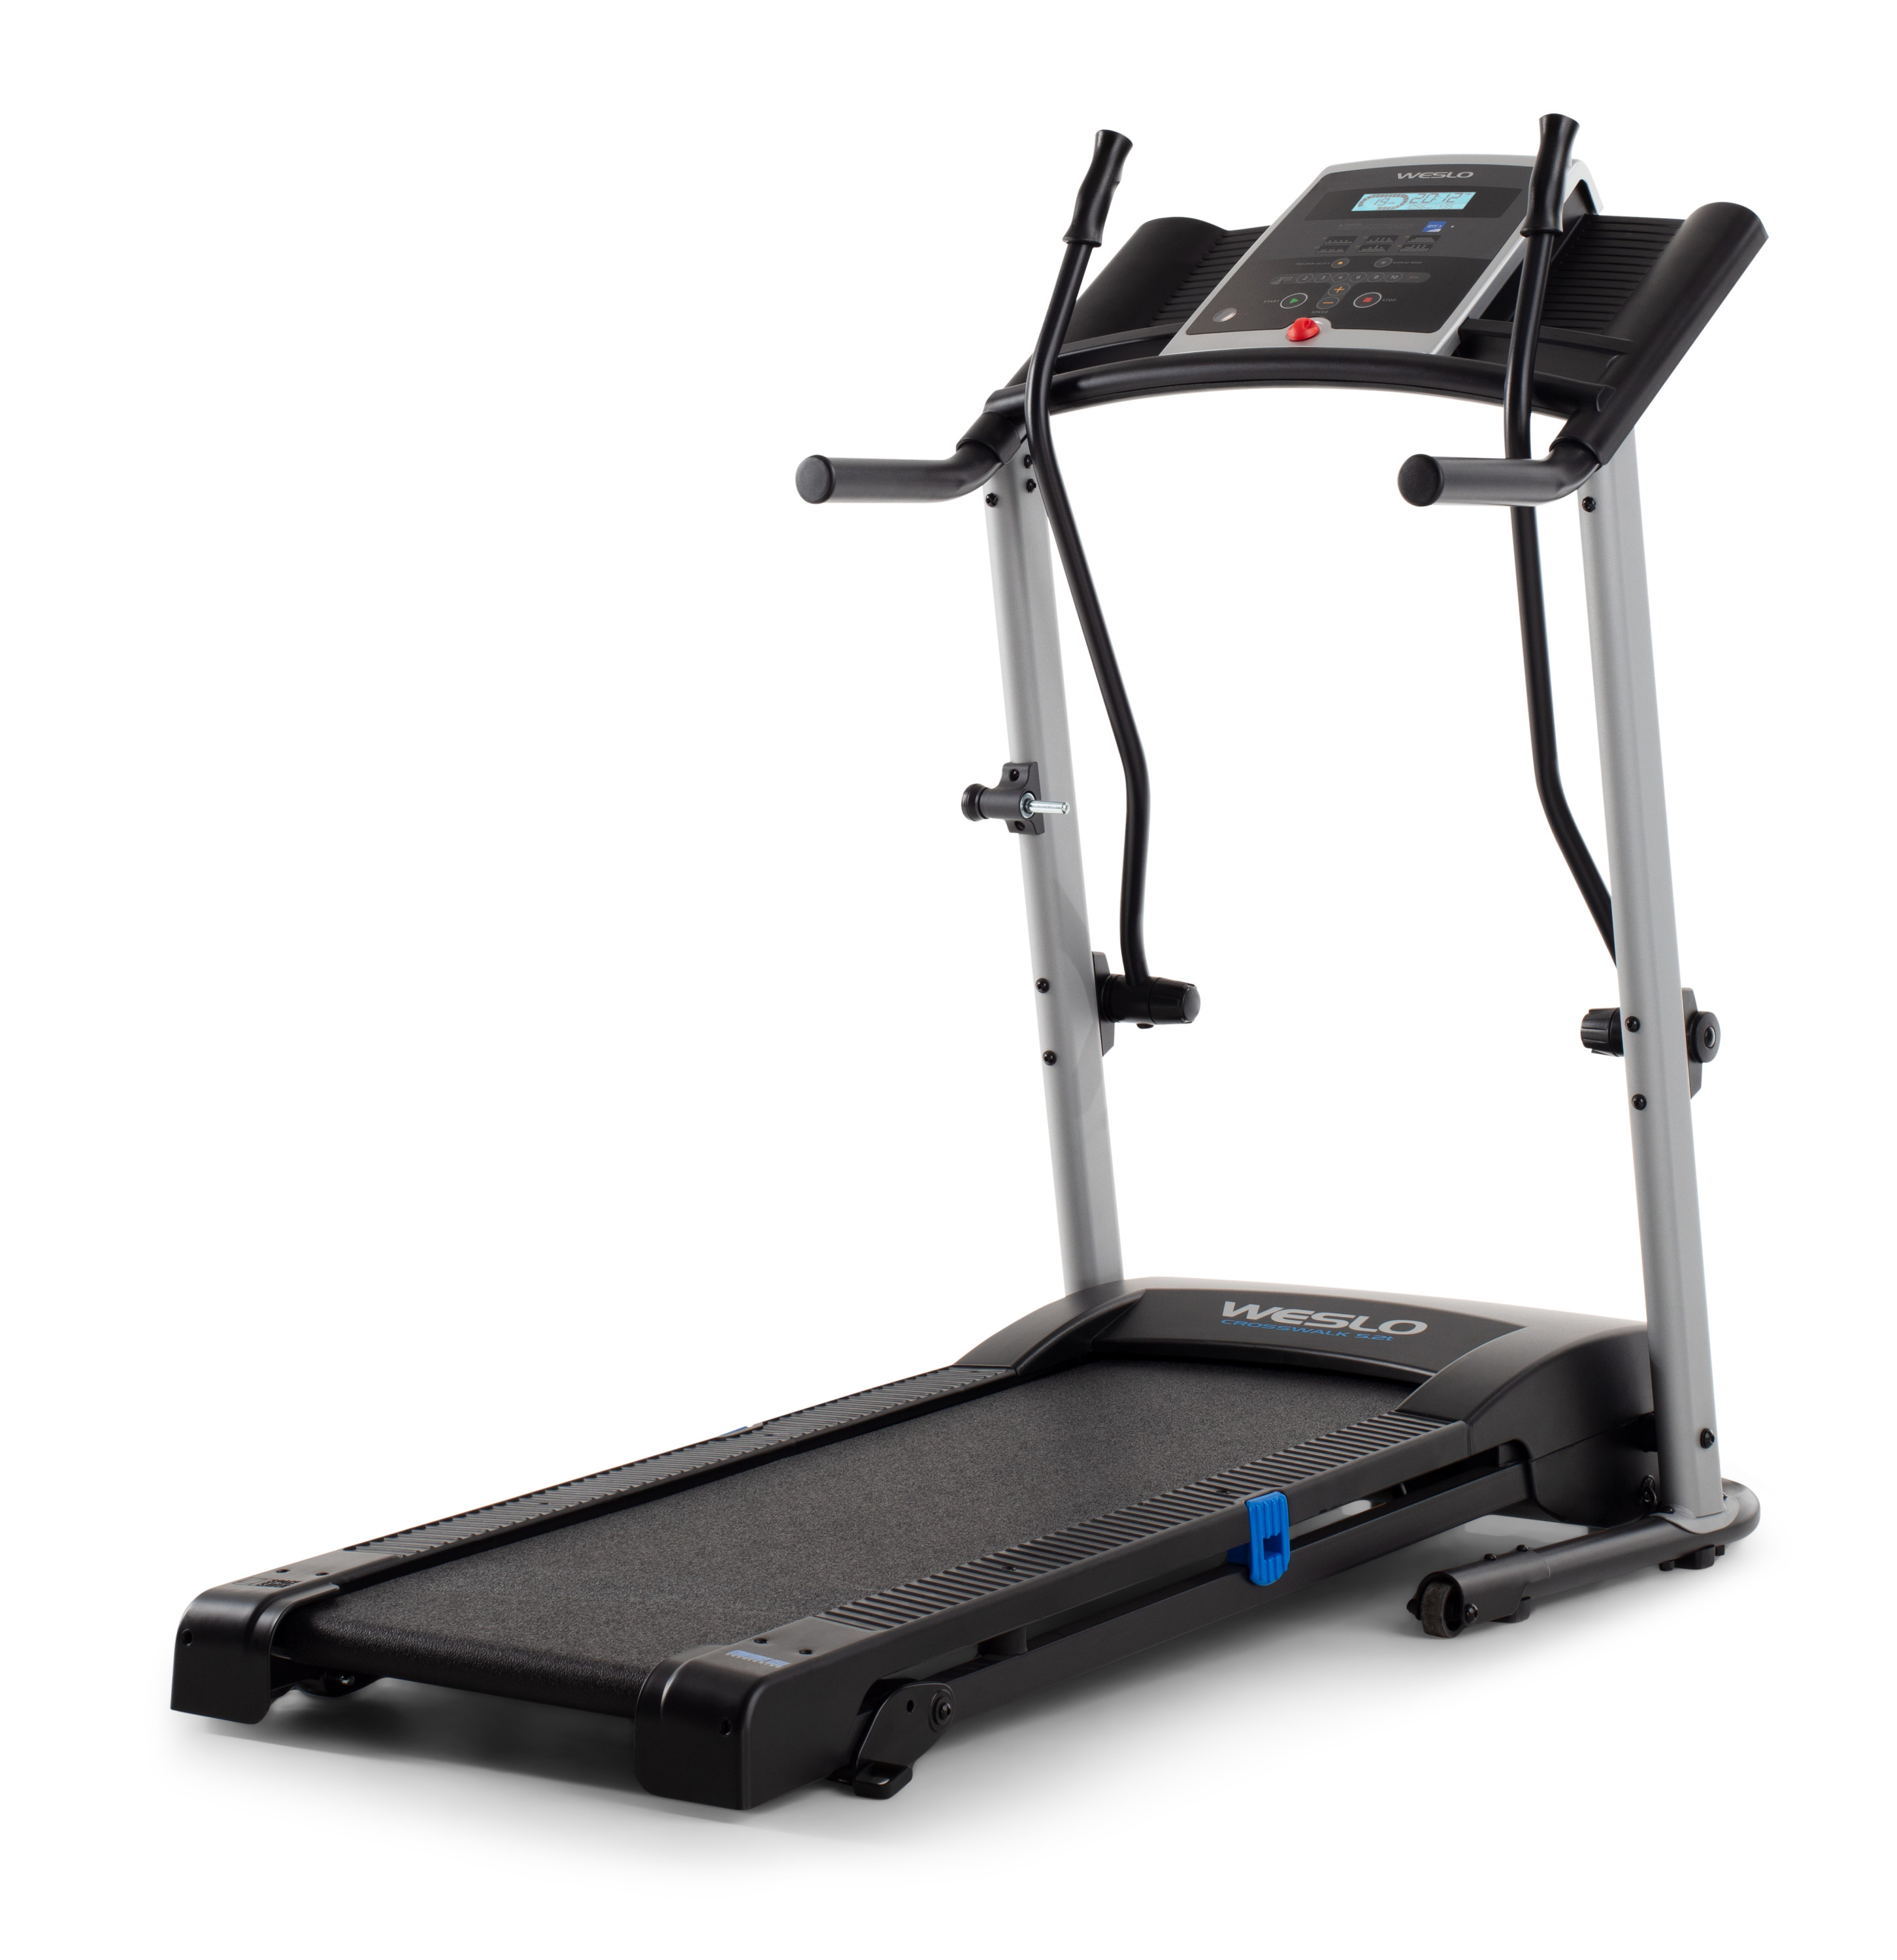 Weslo Crosswalk 5.2t Total Body Treadmill with Upper Body Workout Arms, iFIT Bluetooth Enabled - image 1 of 23